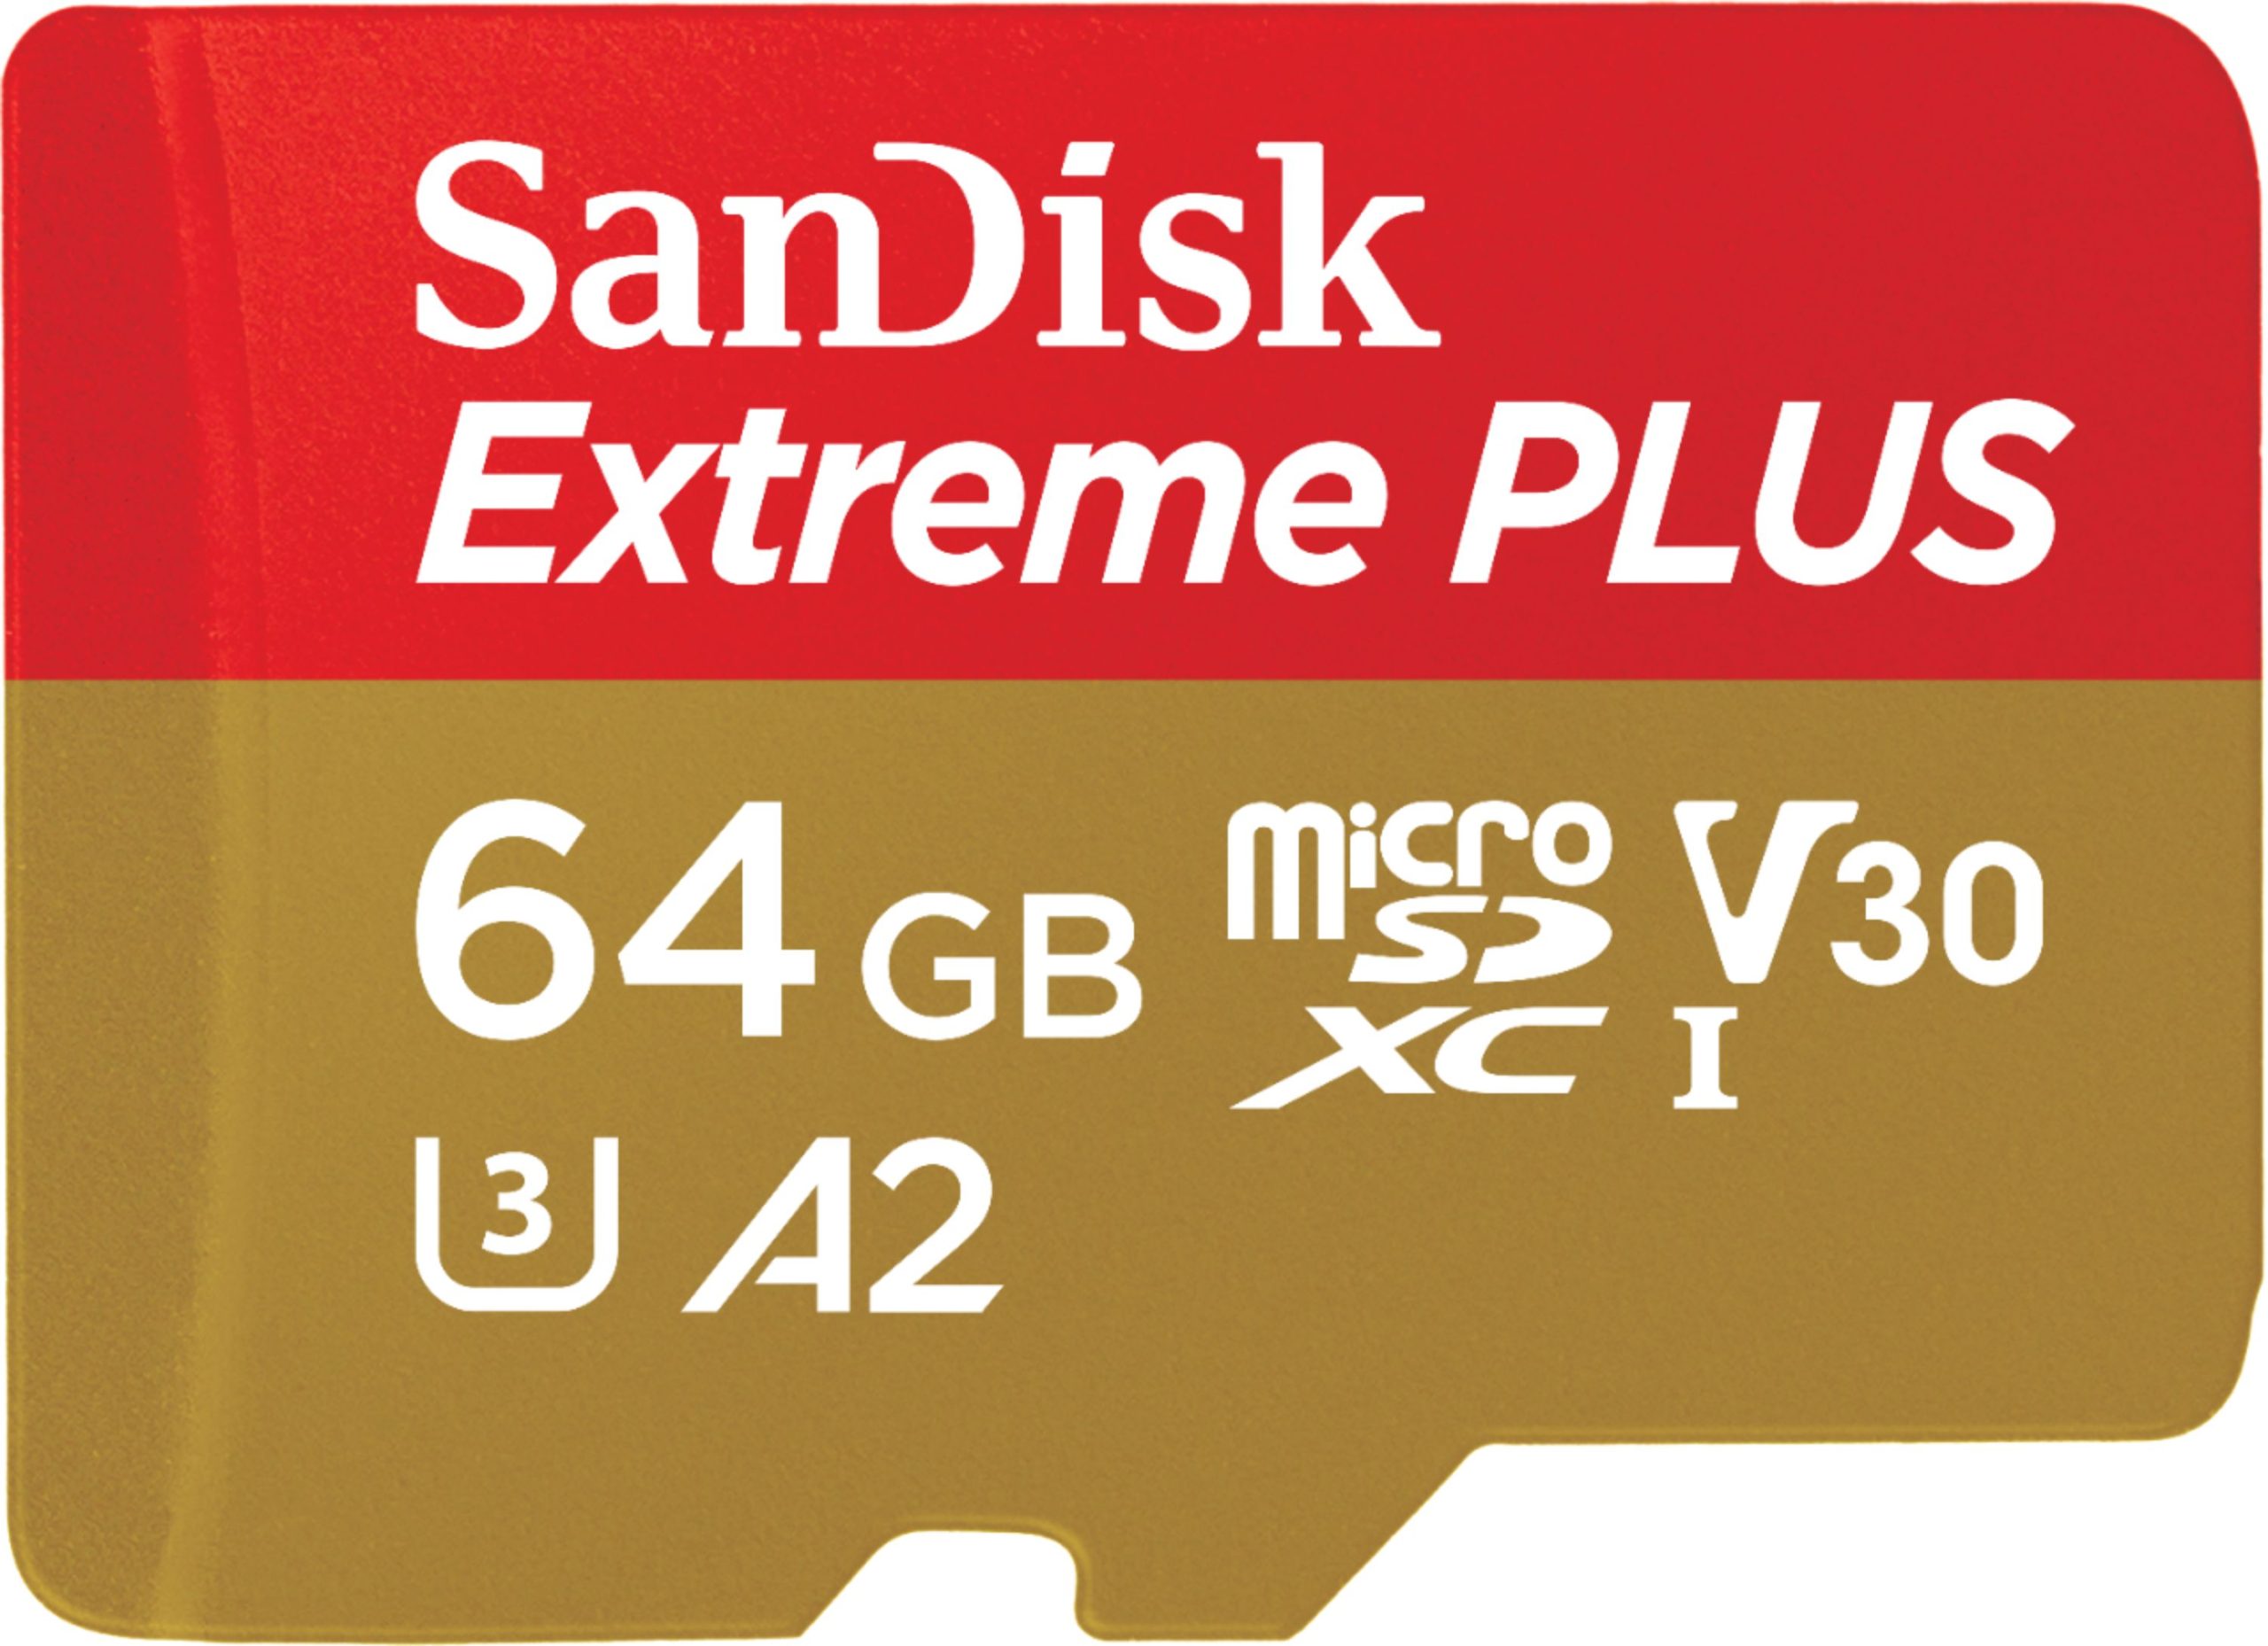 SanDisk – Extreme PLUS 64GB microSDXC UHS-I Memory Card – Just $16.99 at Best Buy